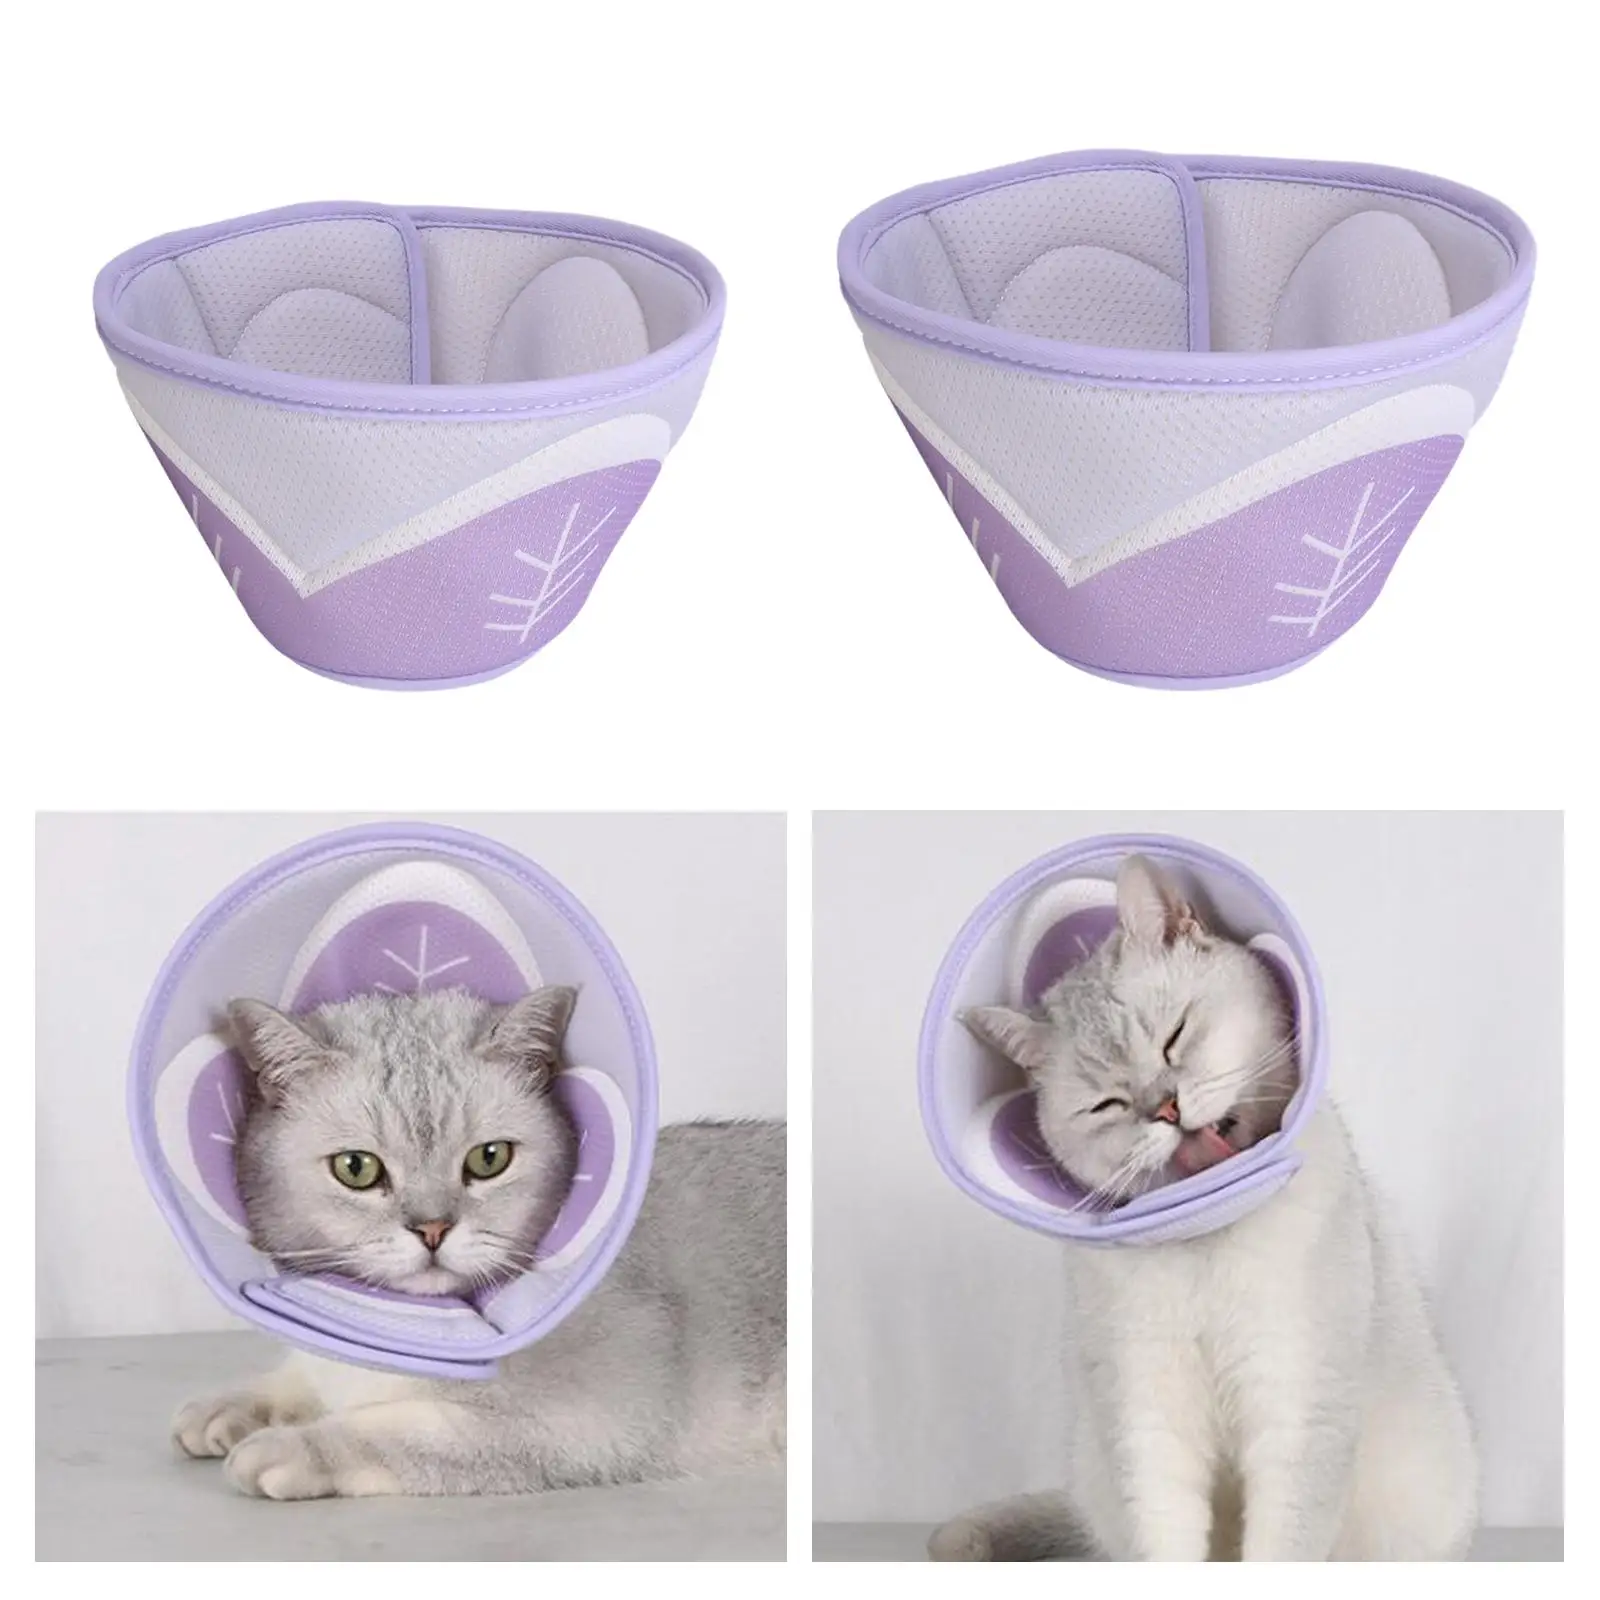 Cat Cone Anti Scratching Easy to Wear Soft Adjustable Mesh Fabric Dog Cone for Cat Trimming Pet Bathing Small Dogs Kittens Cats